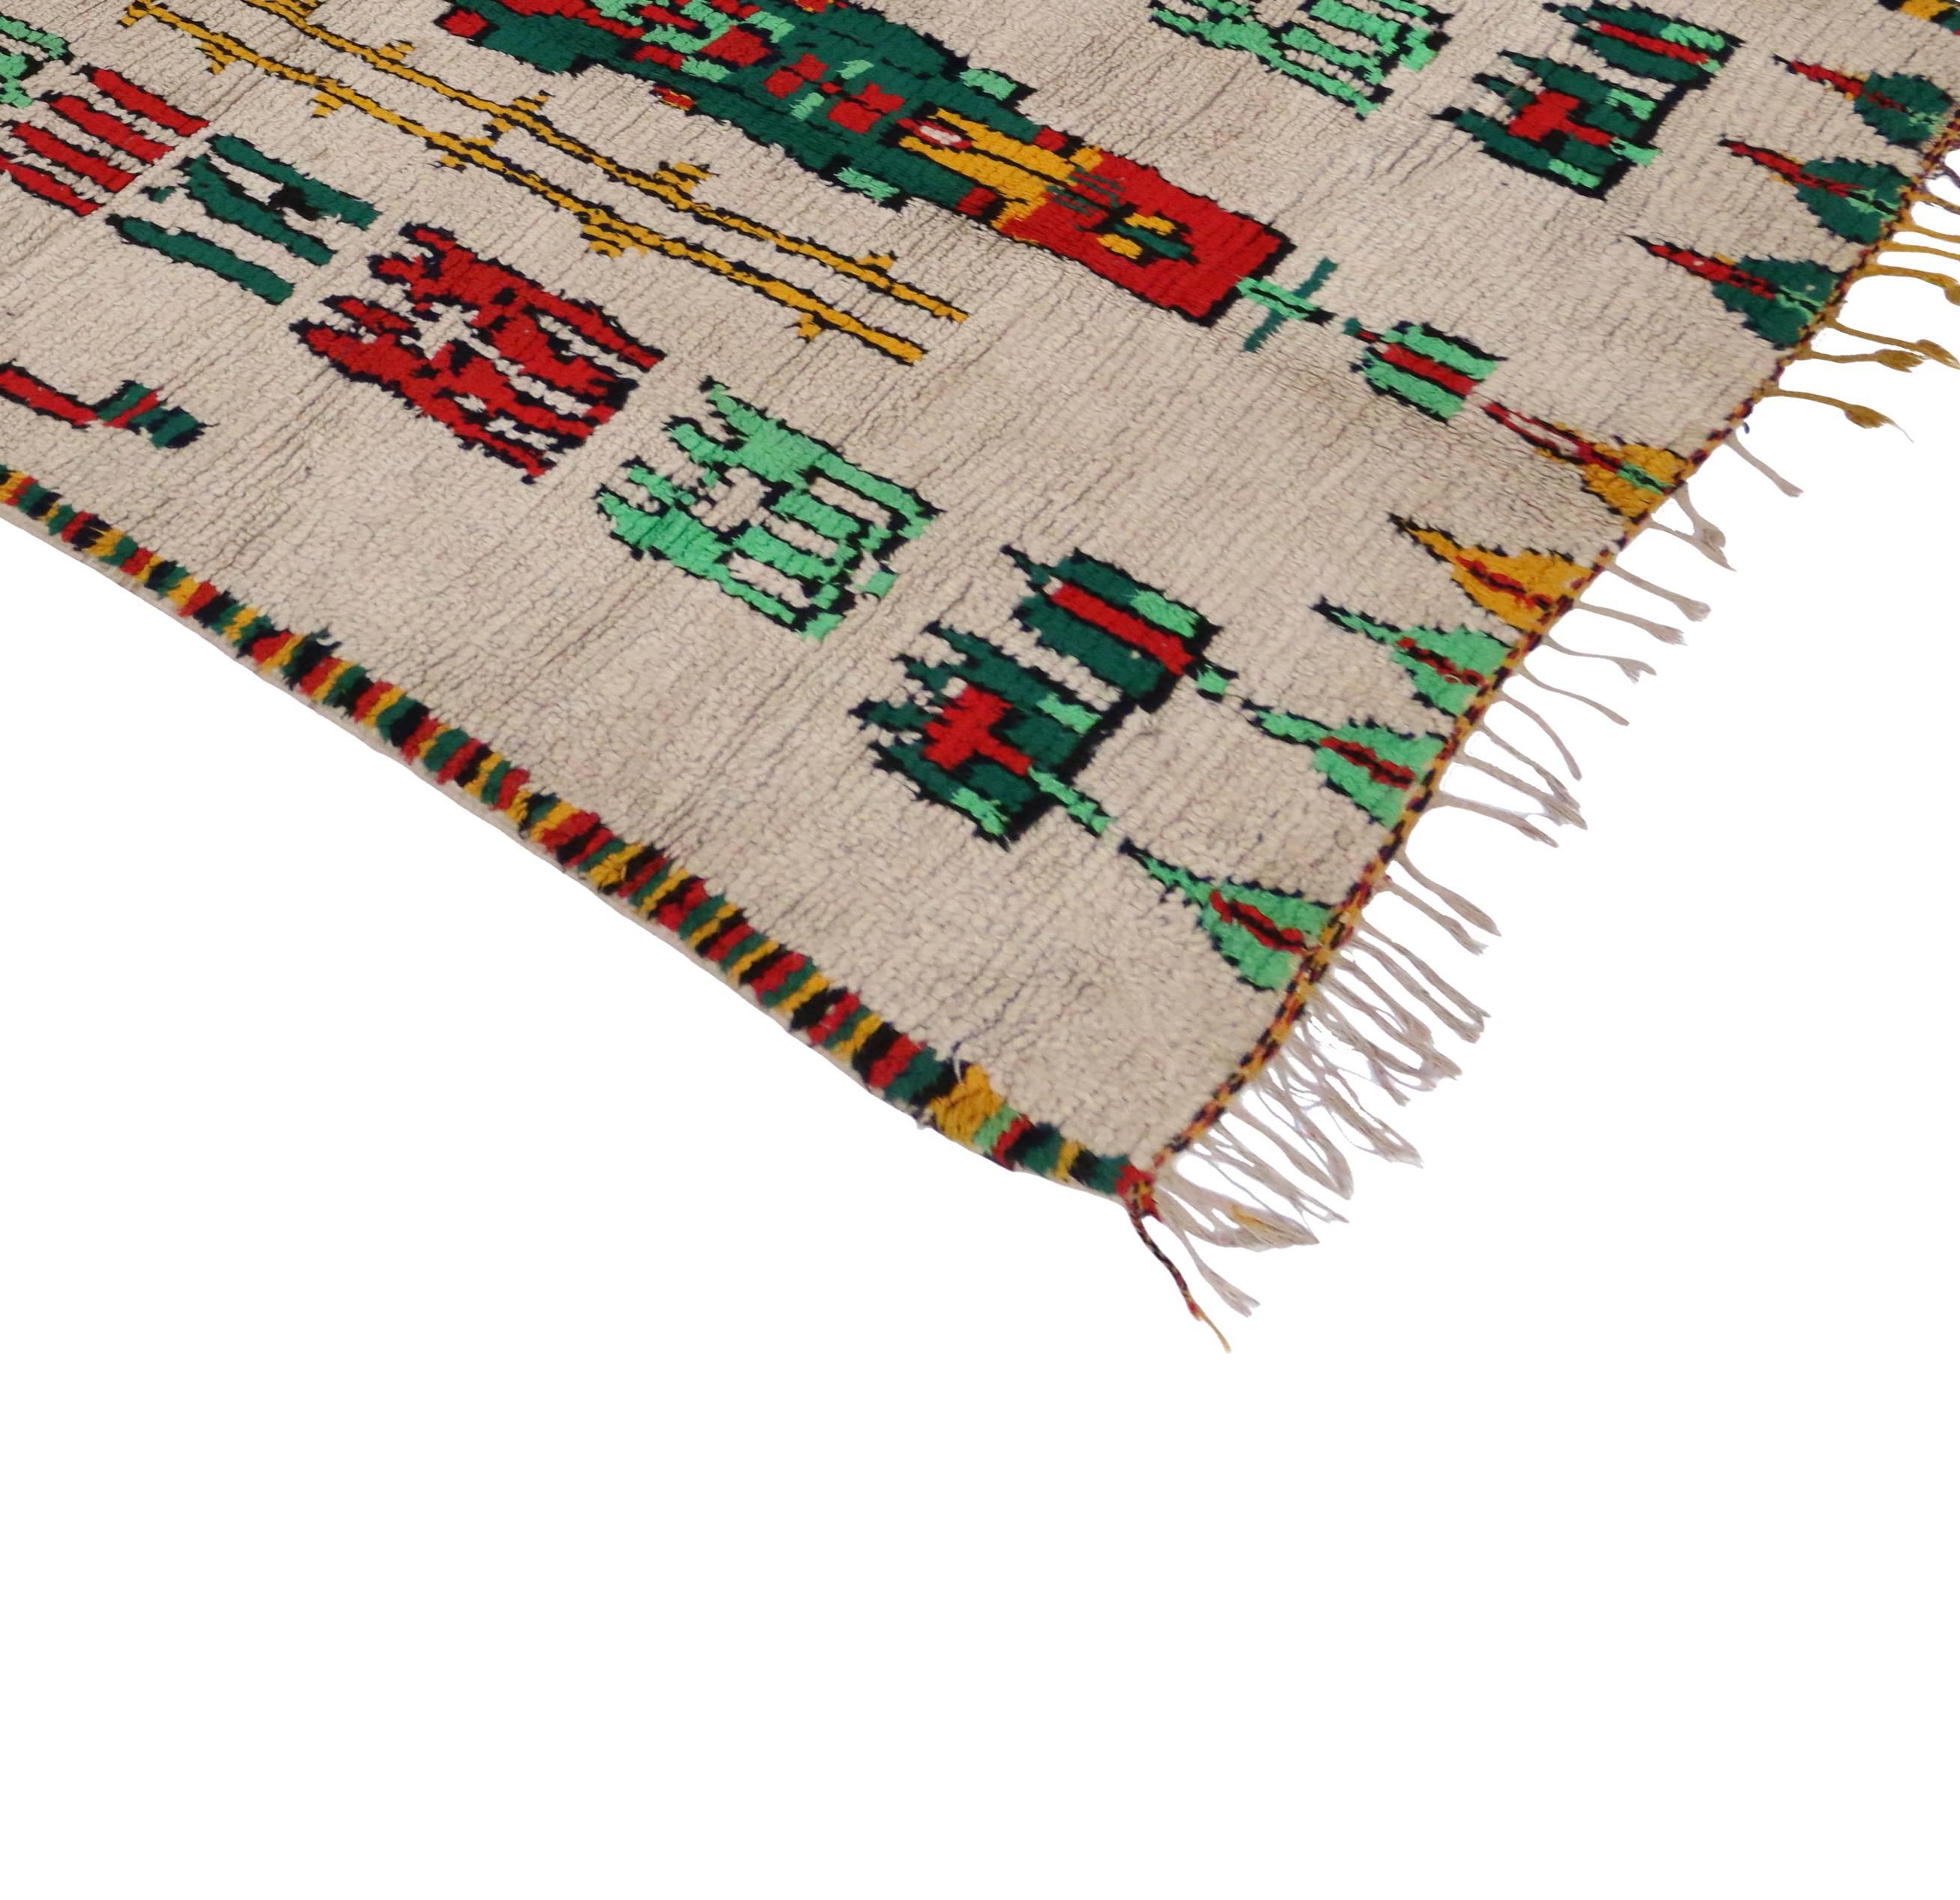 20068 Vintage Berber Moroccan Azilal Rug with Modern Tribal Design. This hand-knotted wool vintage Berber Moroccan Azilal rug features modern tribal design. This Moroccan rug is a fine example of Berber Tribe weaving creativity and freedom at its